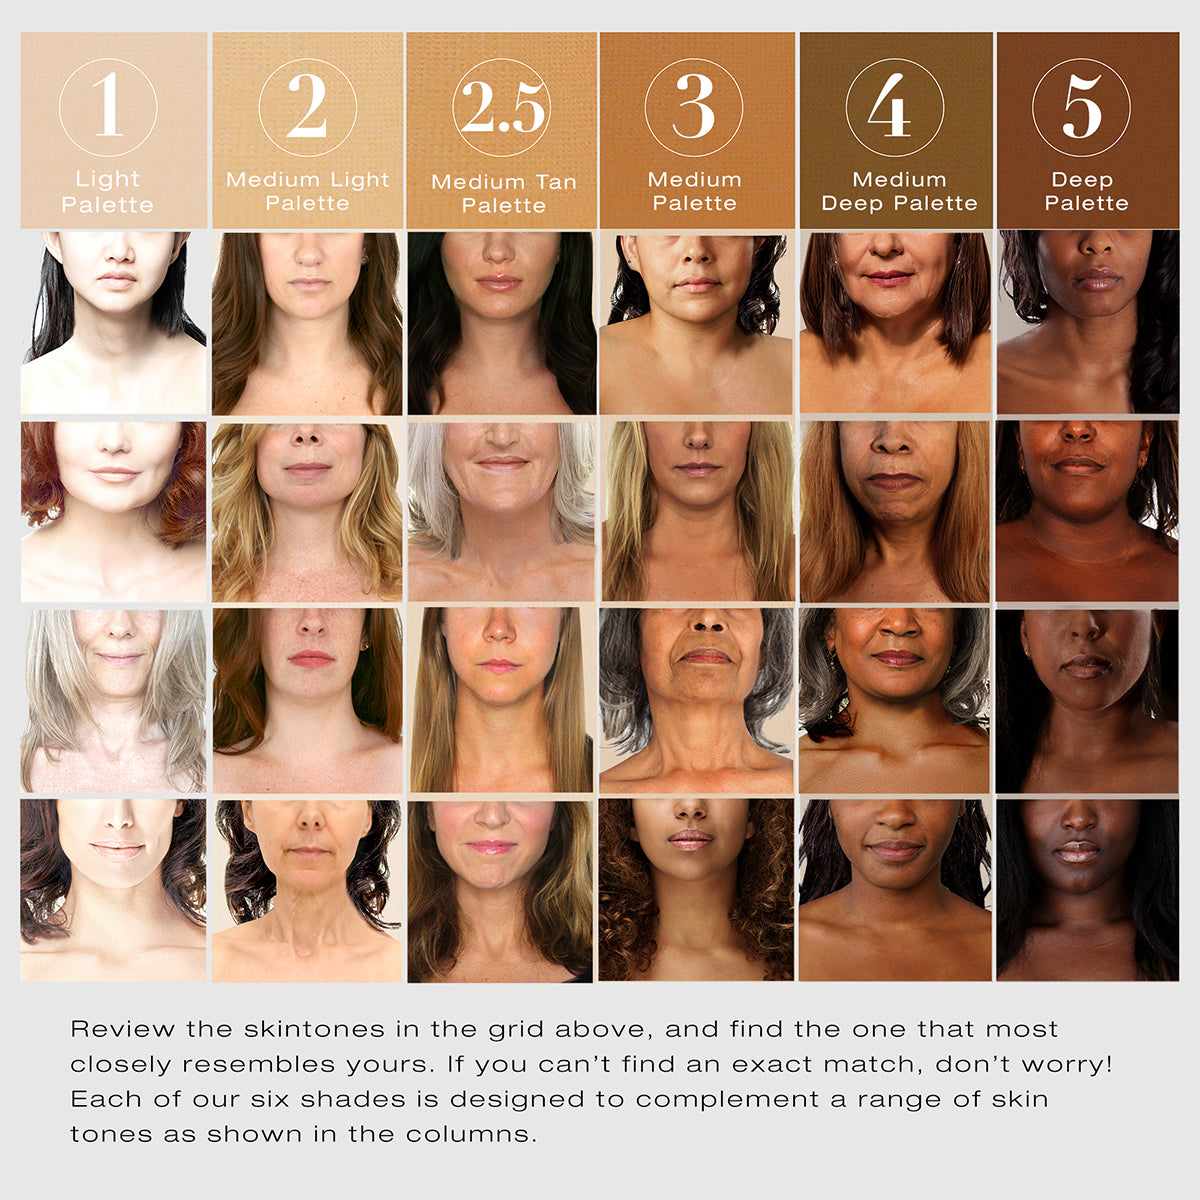 Grid showing how to find your shade and number for the Fold Out Face Palette.  1 is the lightest shade (light palette) and 5 is the darkest shade (the deep palette). Under each number includes example images of models with different skin tones to find your perfect shade